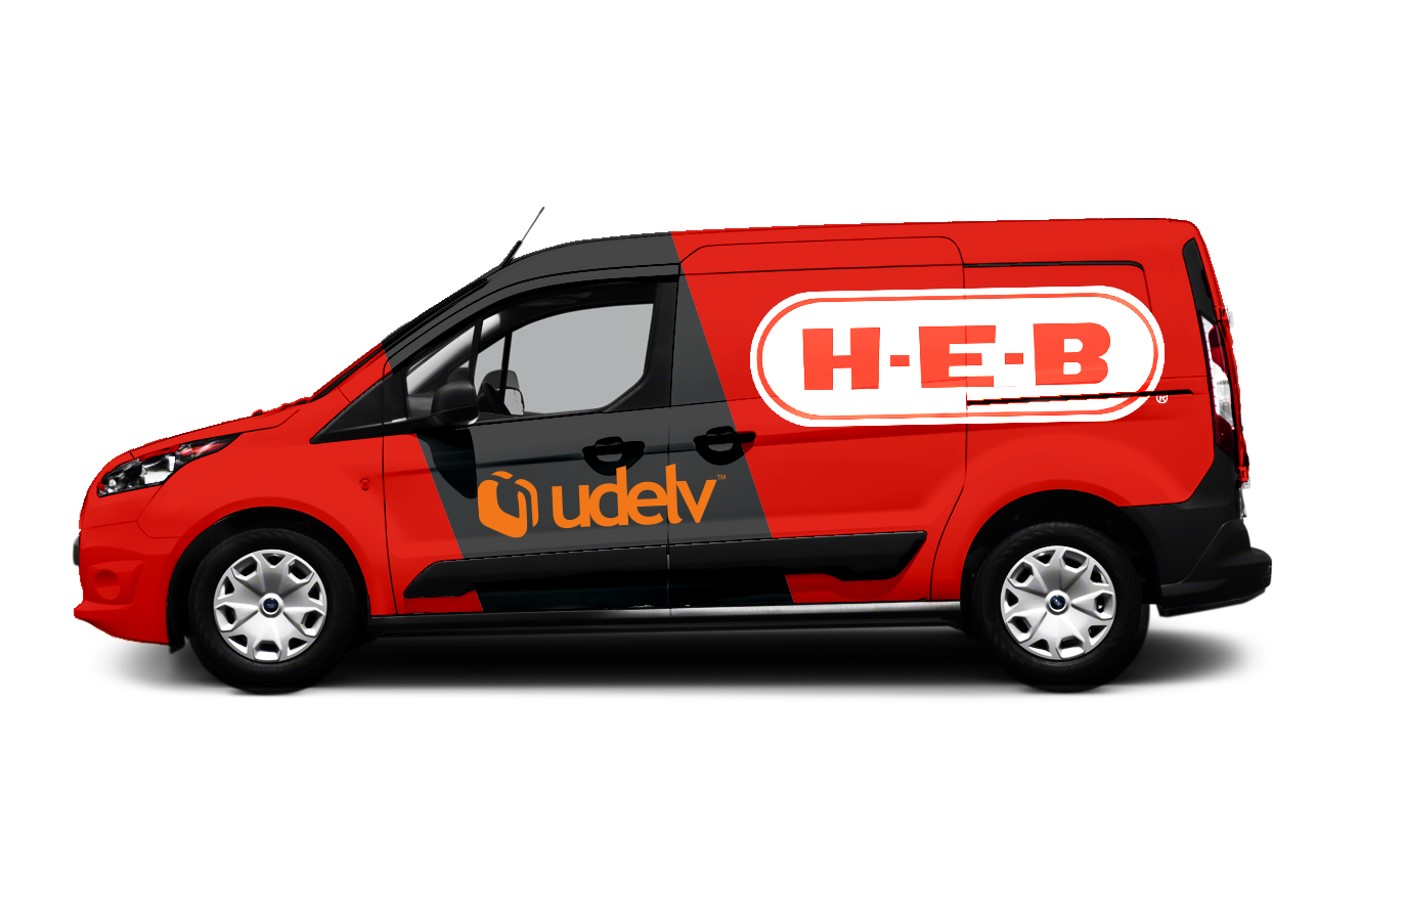 Udelv partners with H-E-B on Texas autonomous grocery delivery pilot